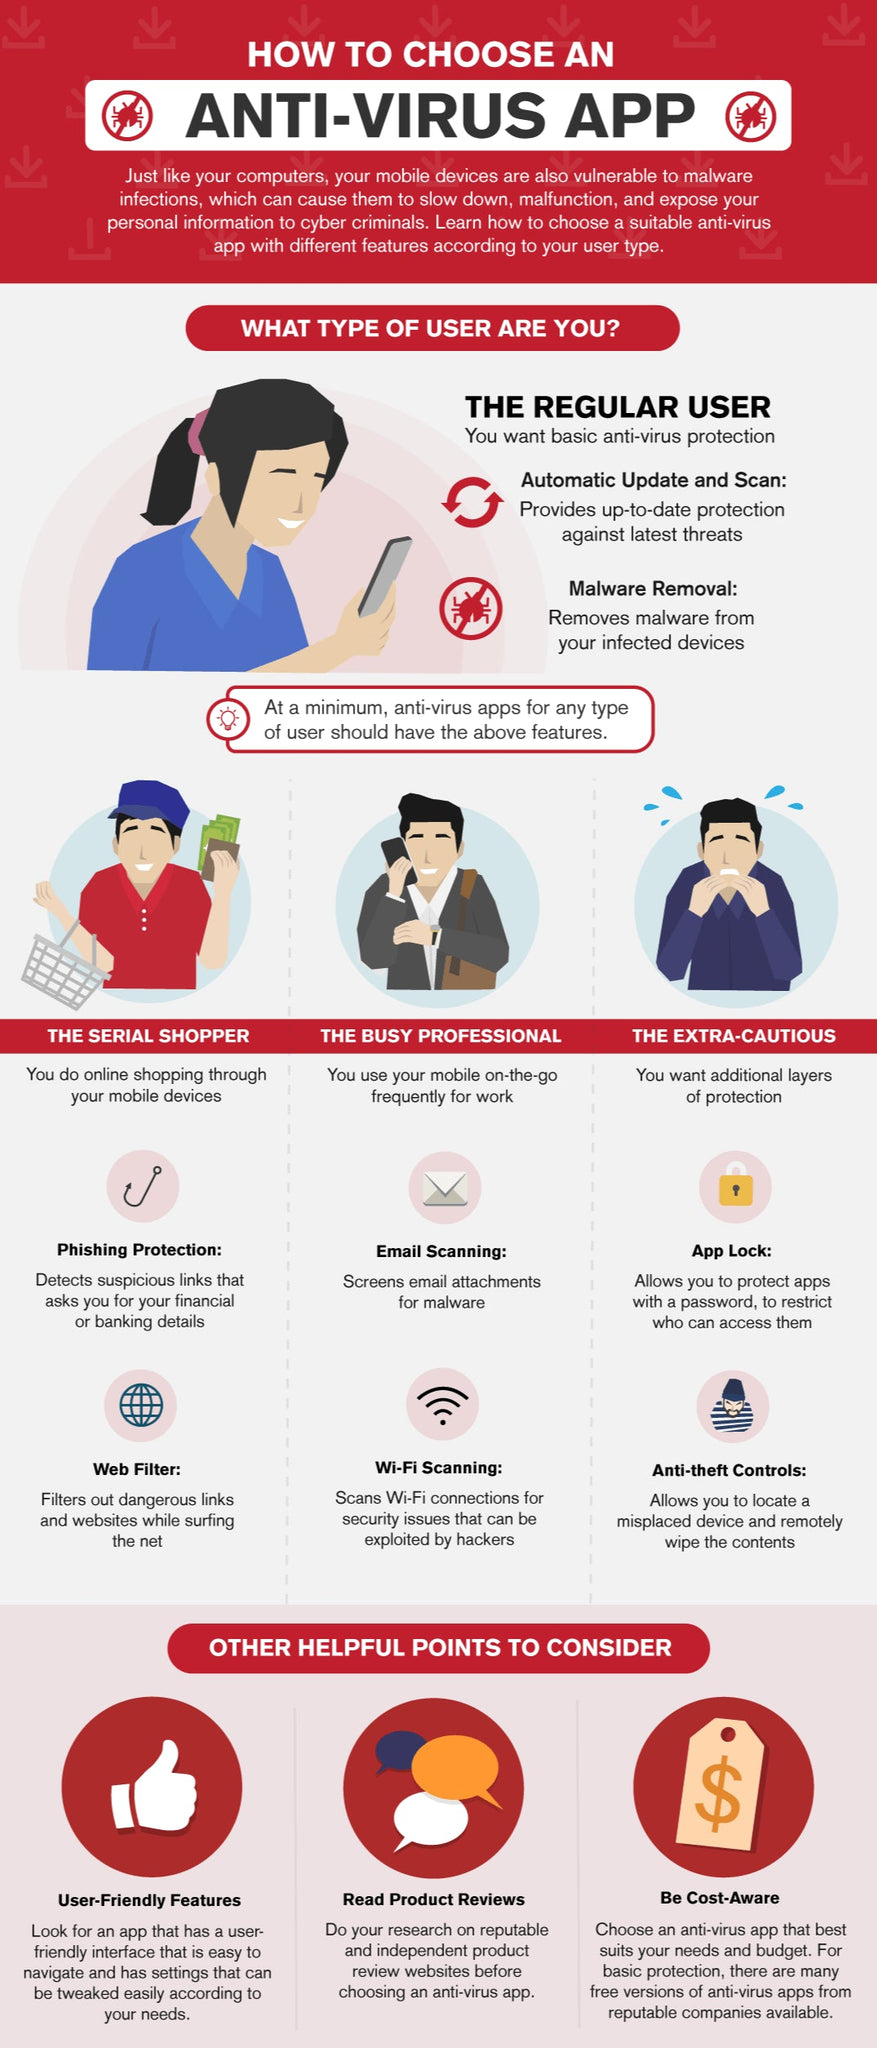 How to choose an anti-virus app infographic